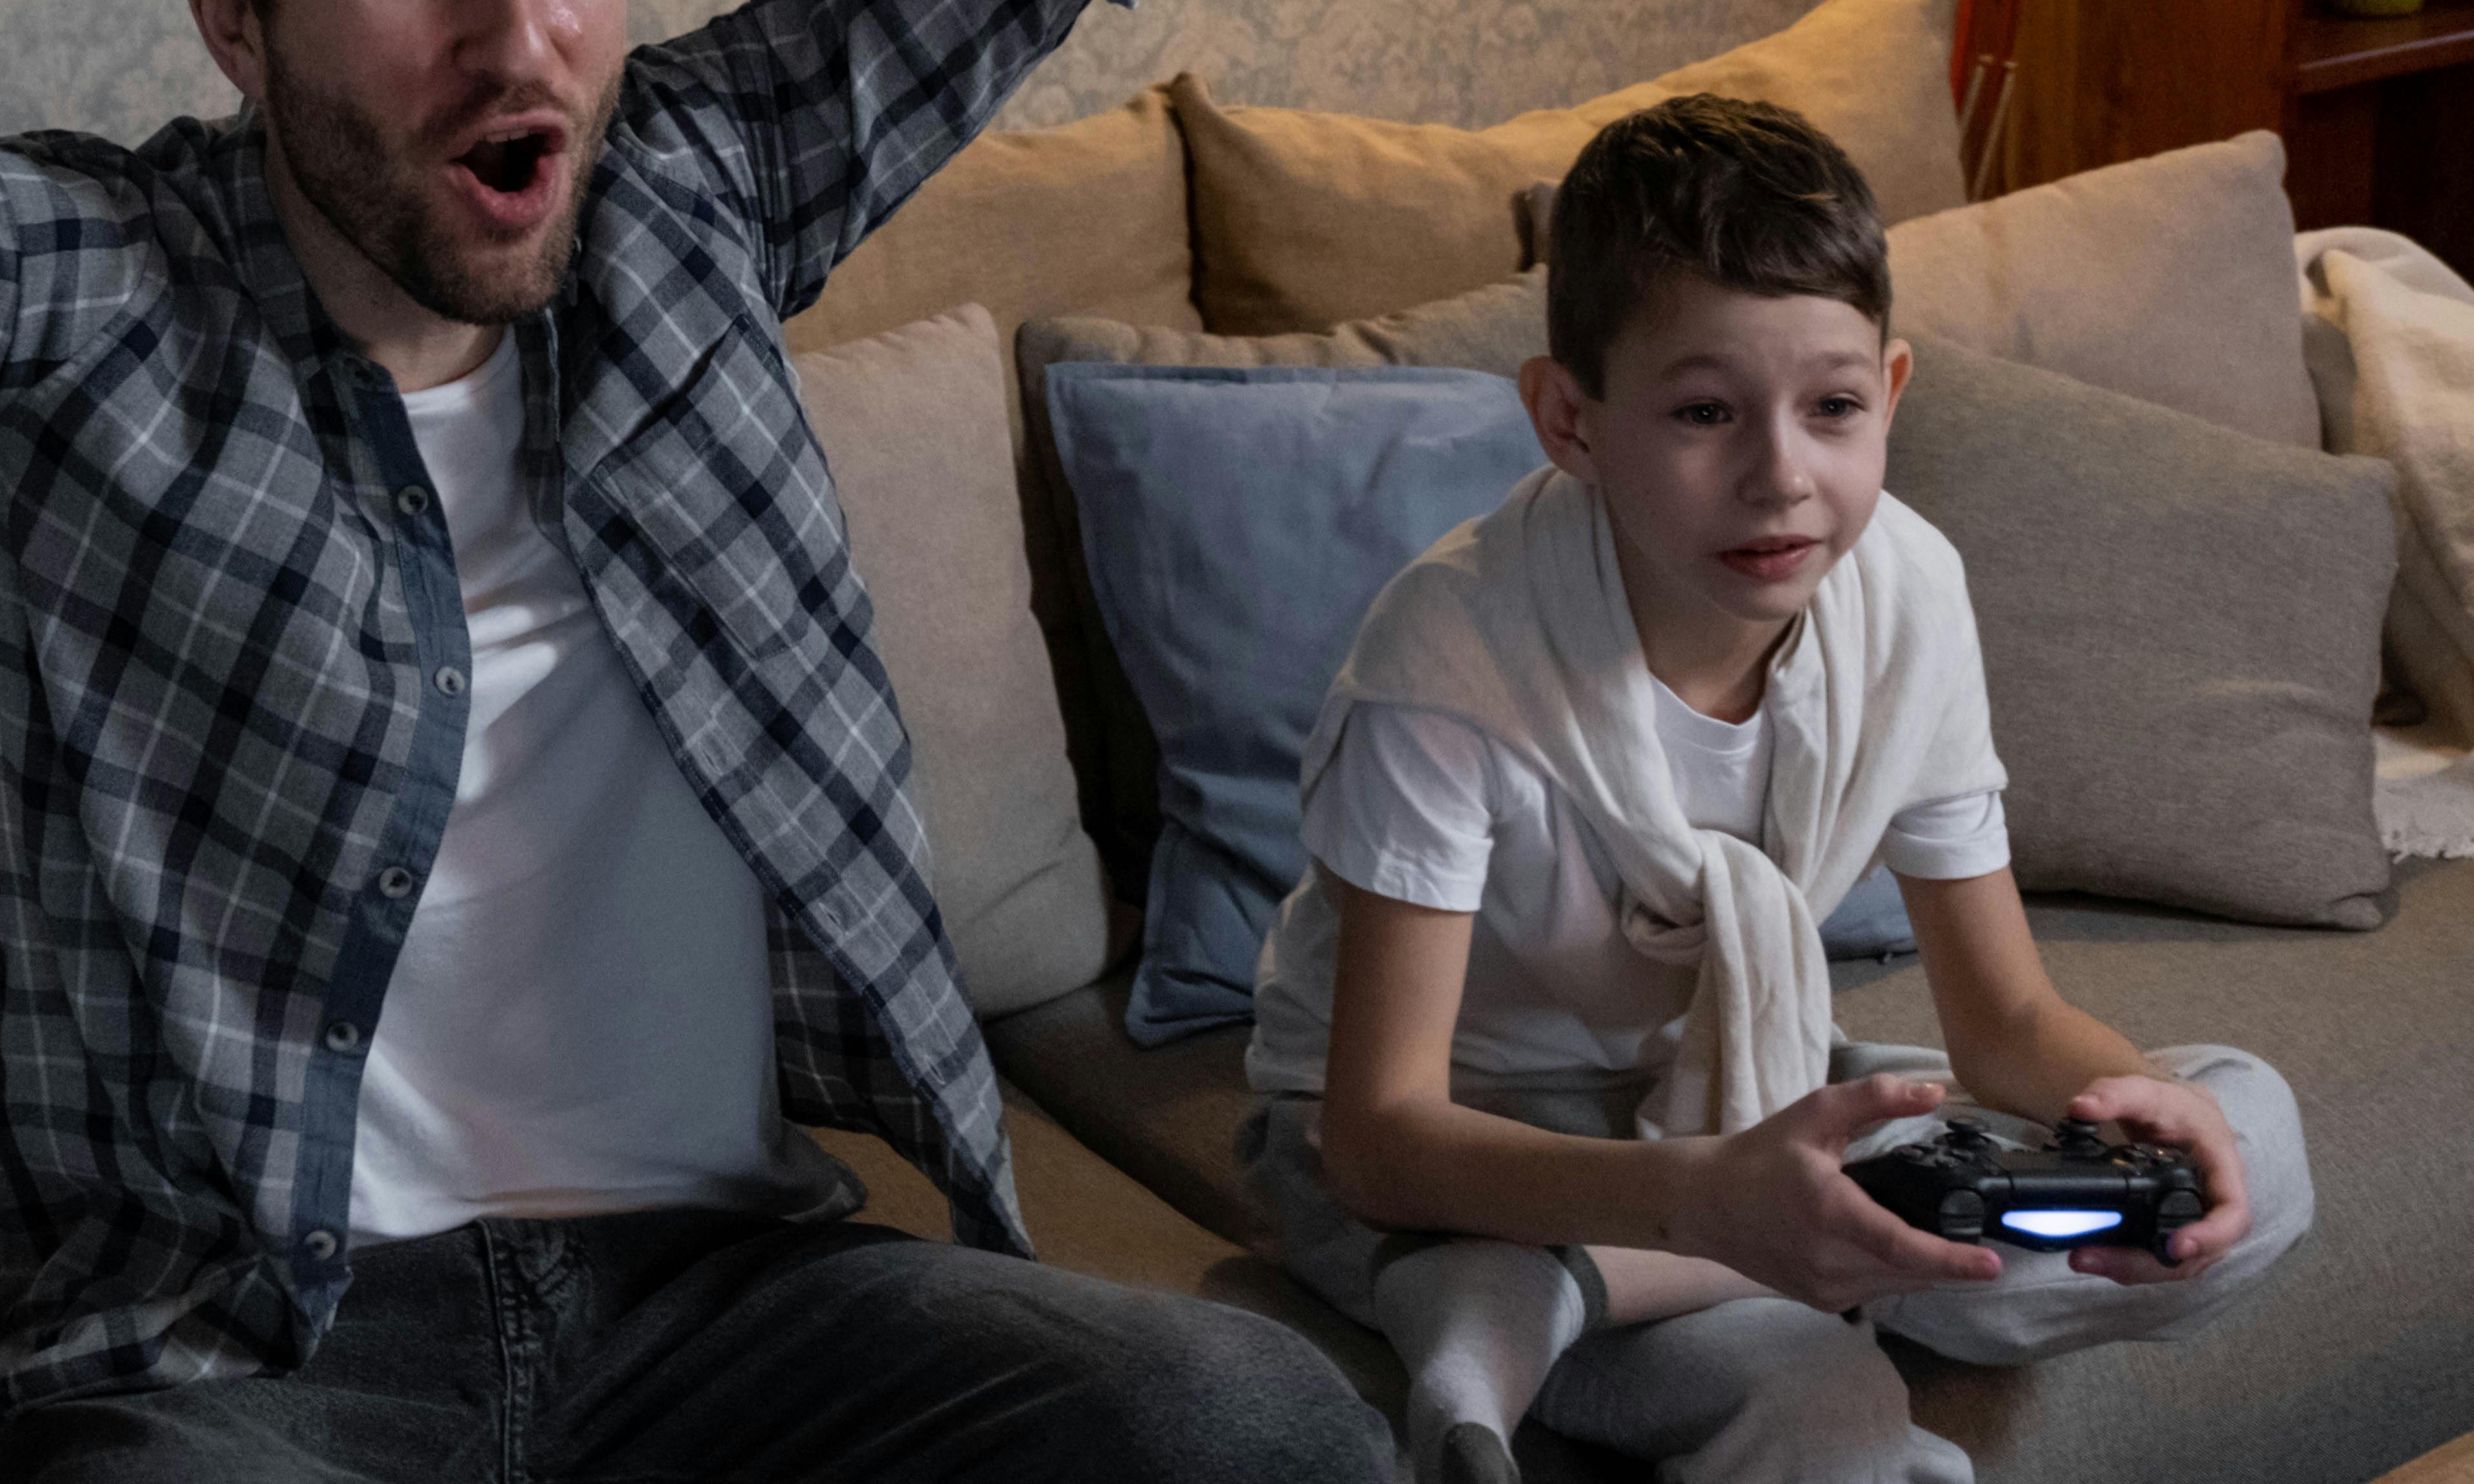 John and Arthur playing video games together | Source: Pexels